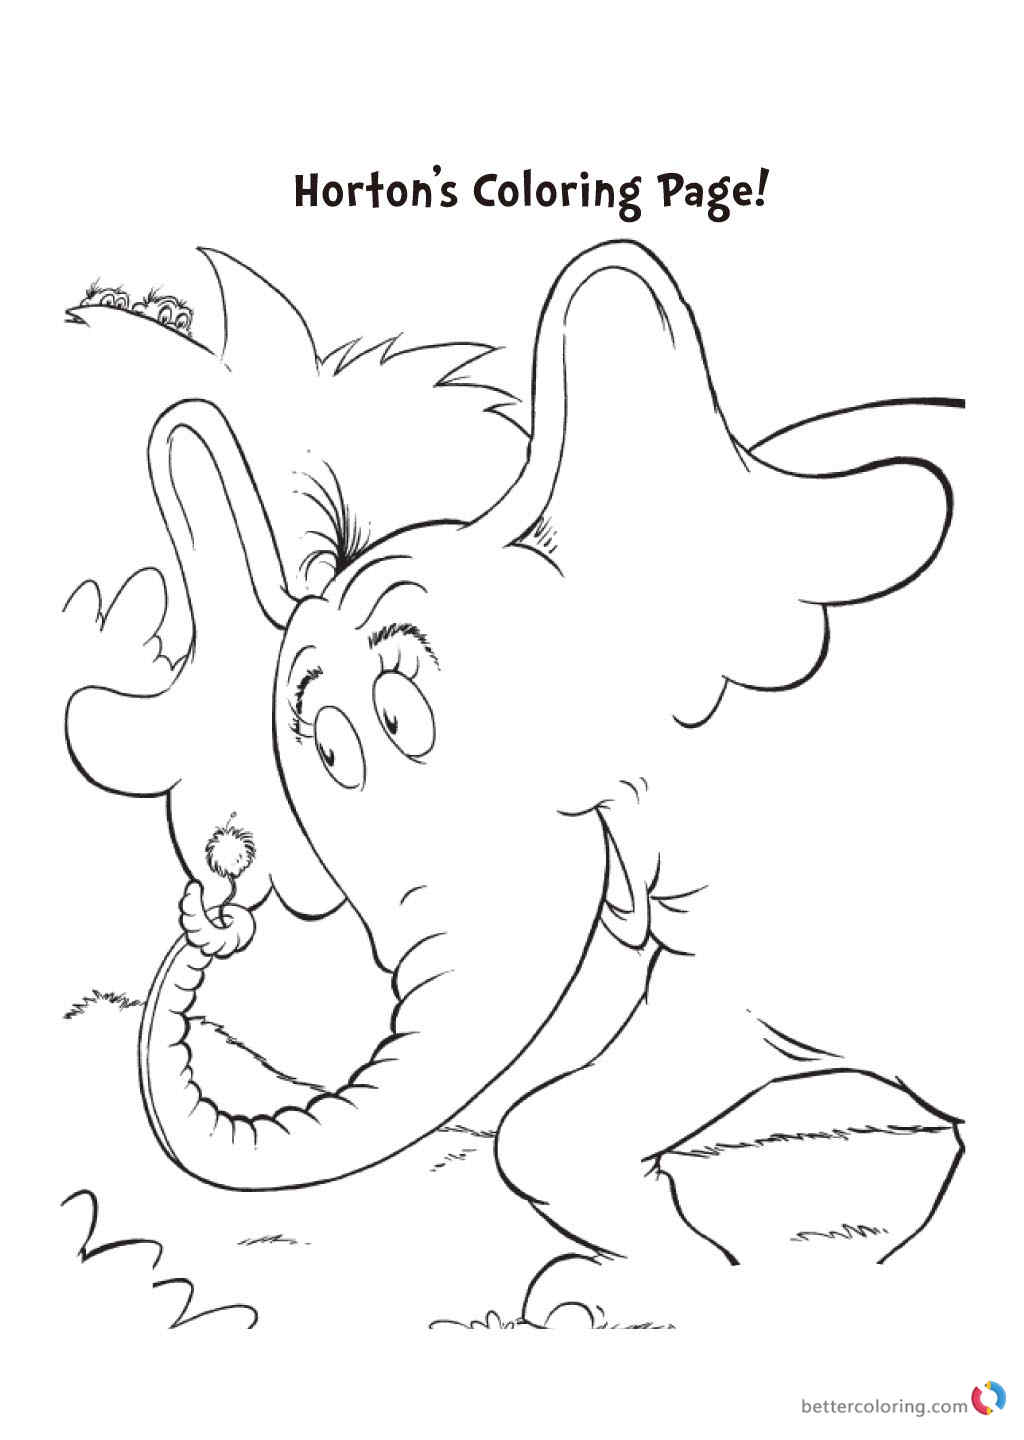 Dr Seuss coloring pages HORTON Free Printable Coloring Pages